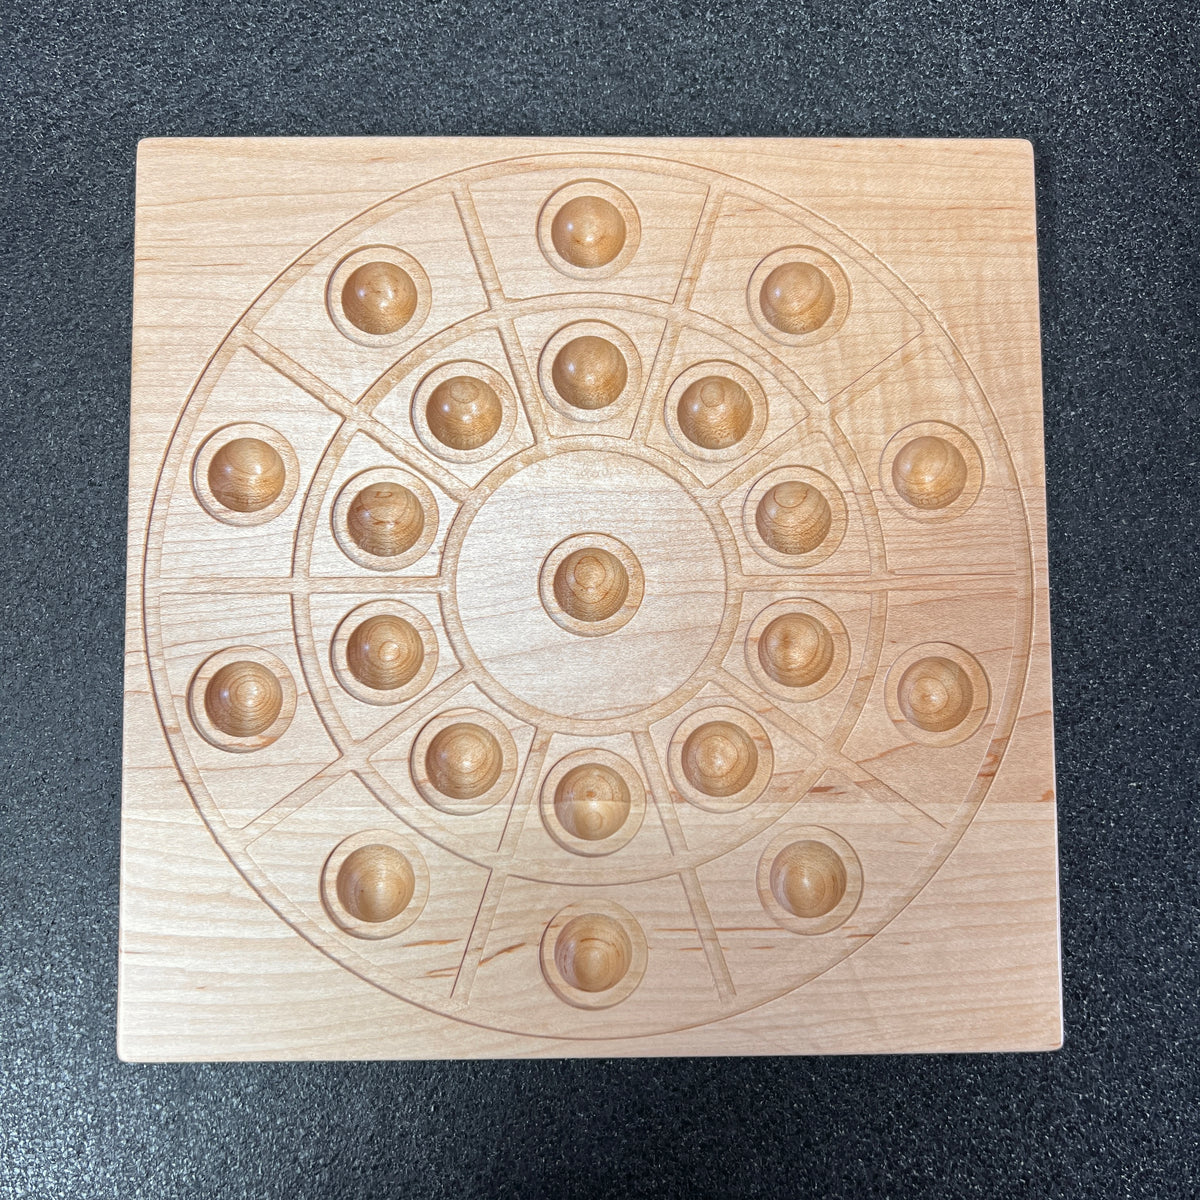 DISCOUNT Multiplication Circle Tray 10x10